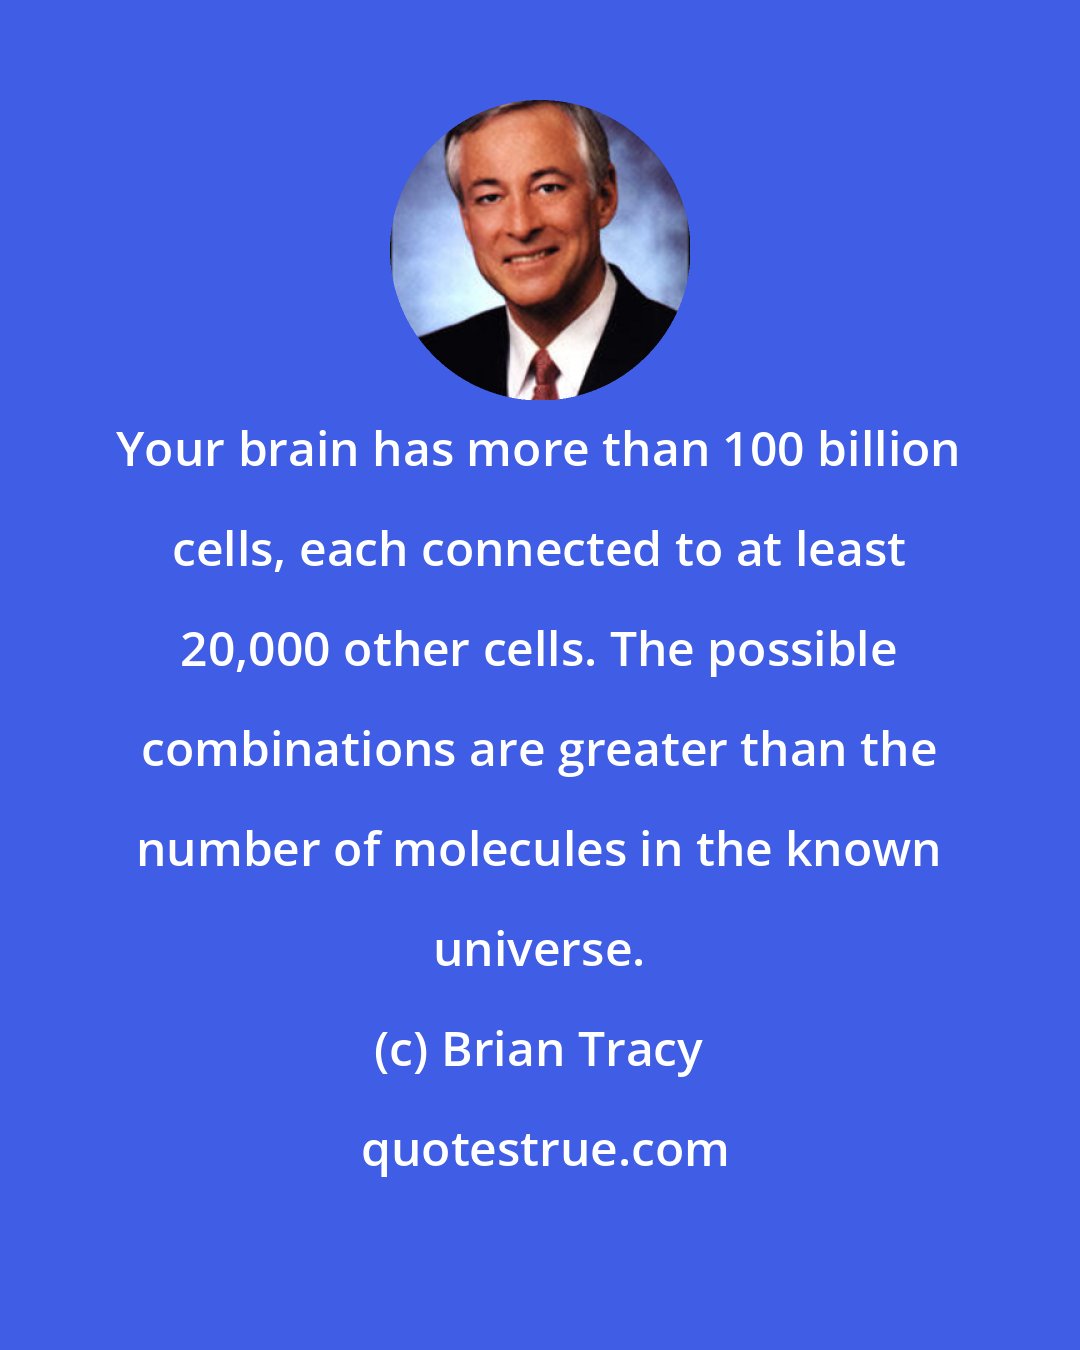 Brian Tracy: Your brain has more than 100 billion cells, each connected to at least 20,000 other cells. The possible combinations are greater than the number of molecules in the known universe.